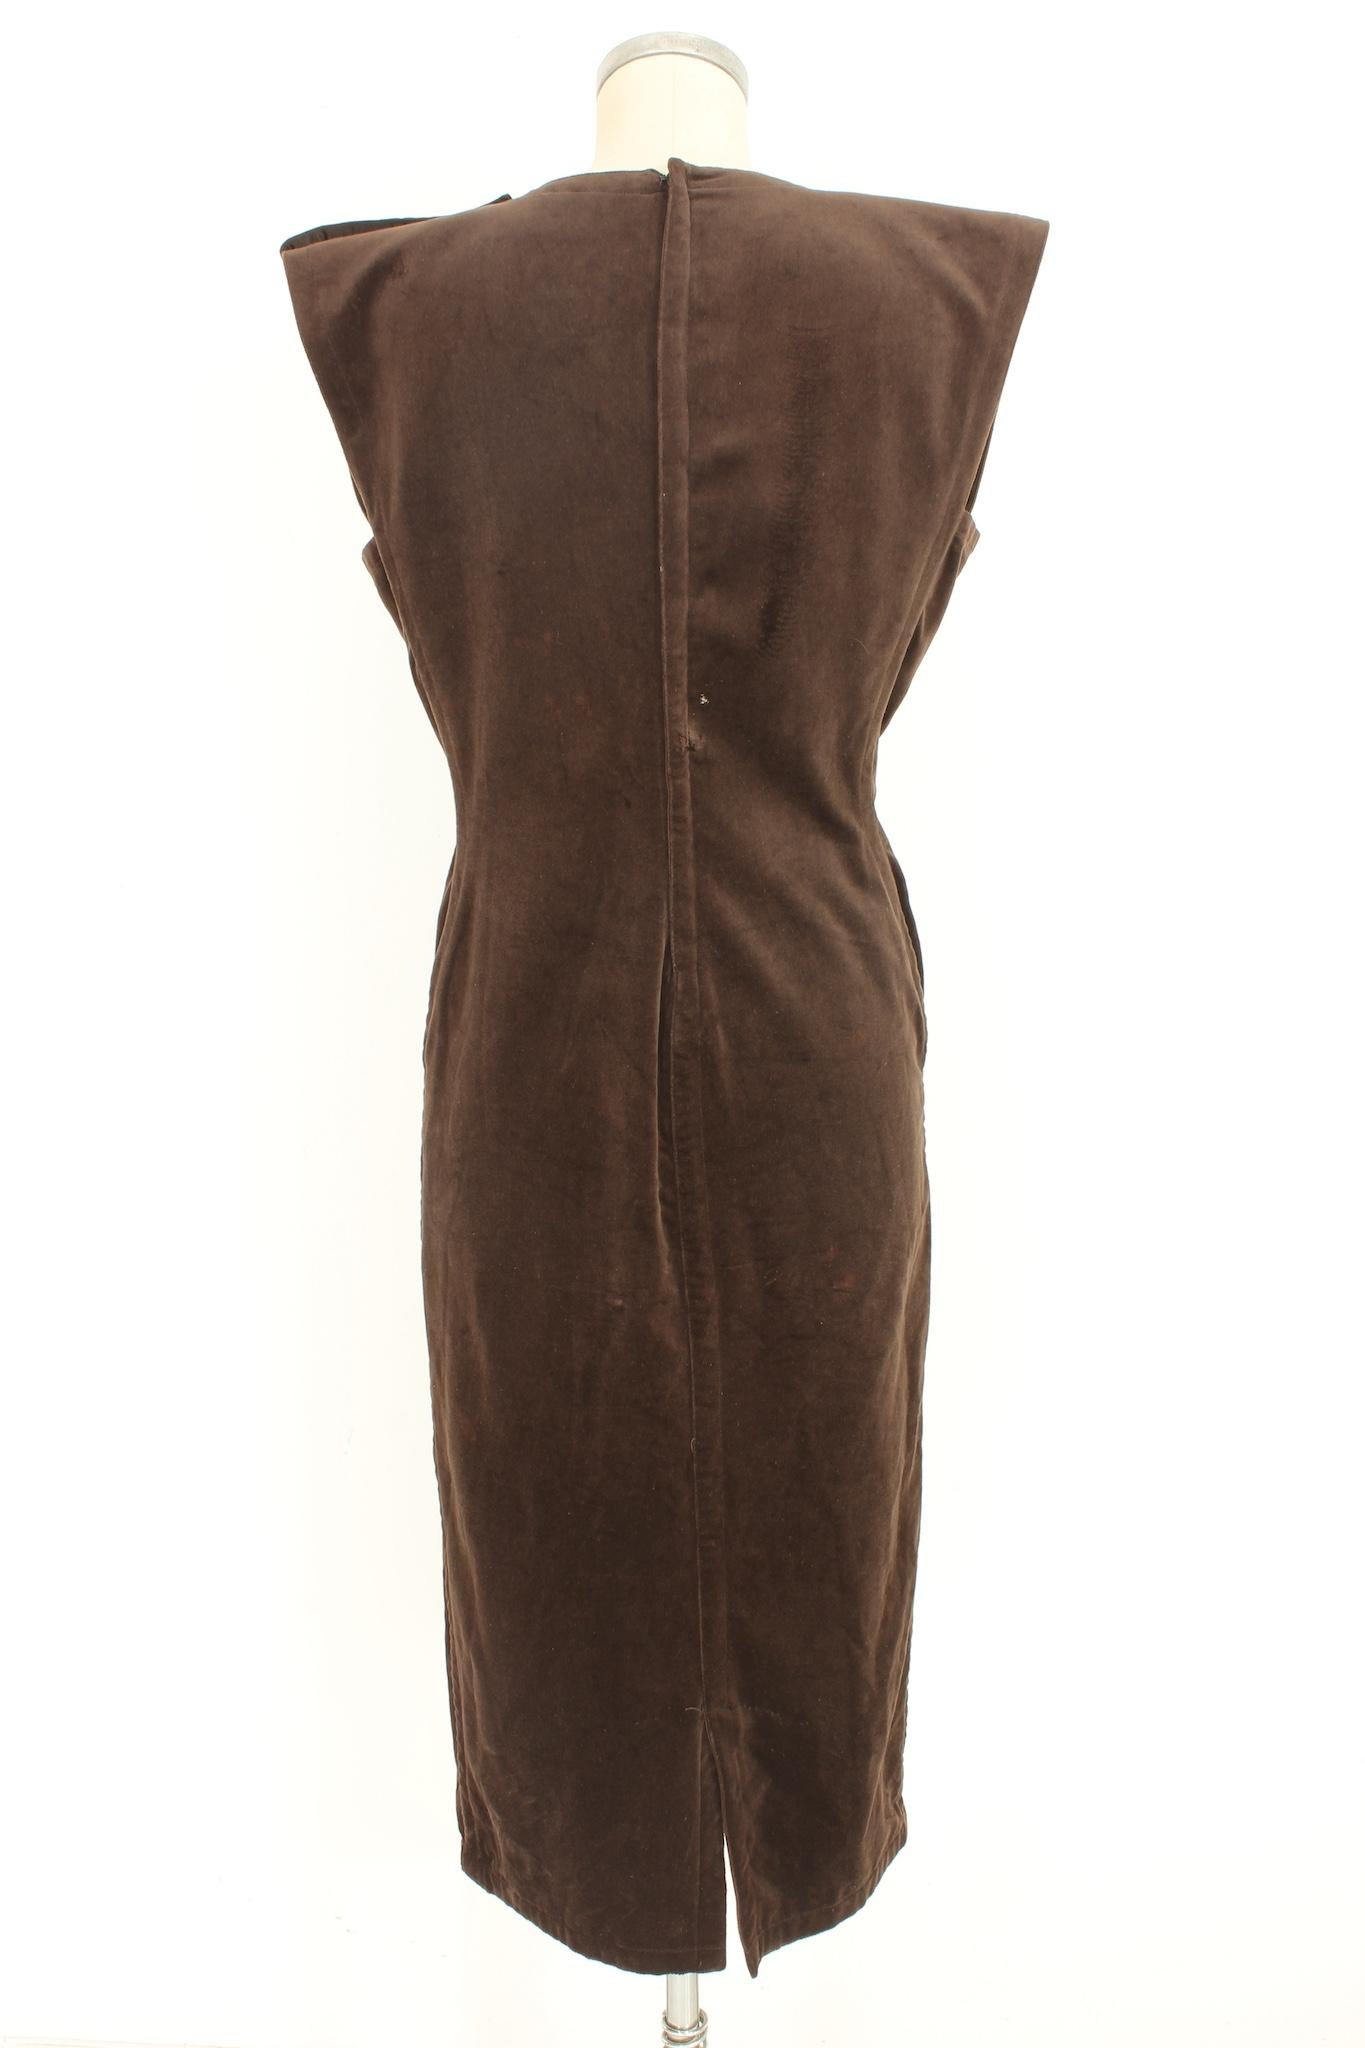 Gianni Versace long 70s vintage evening dress. Silk velvet dress, sheath model, sleeveless, ankle length, two buttons with Swarosky on the shoulder and waist. Zipper closure along the back. Brown colour, 100% silk fabric. Made in Italy.

Size: 42 It